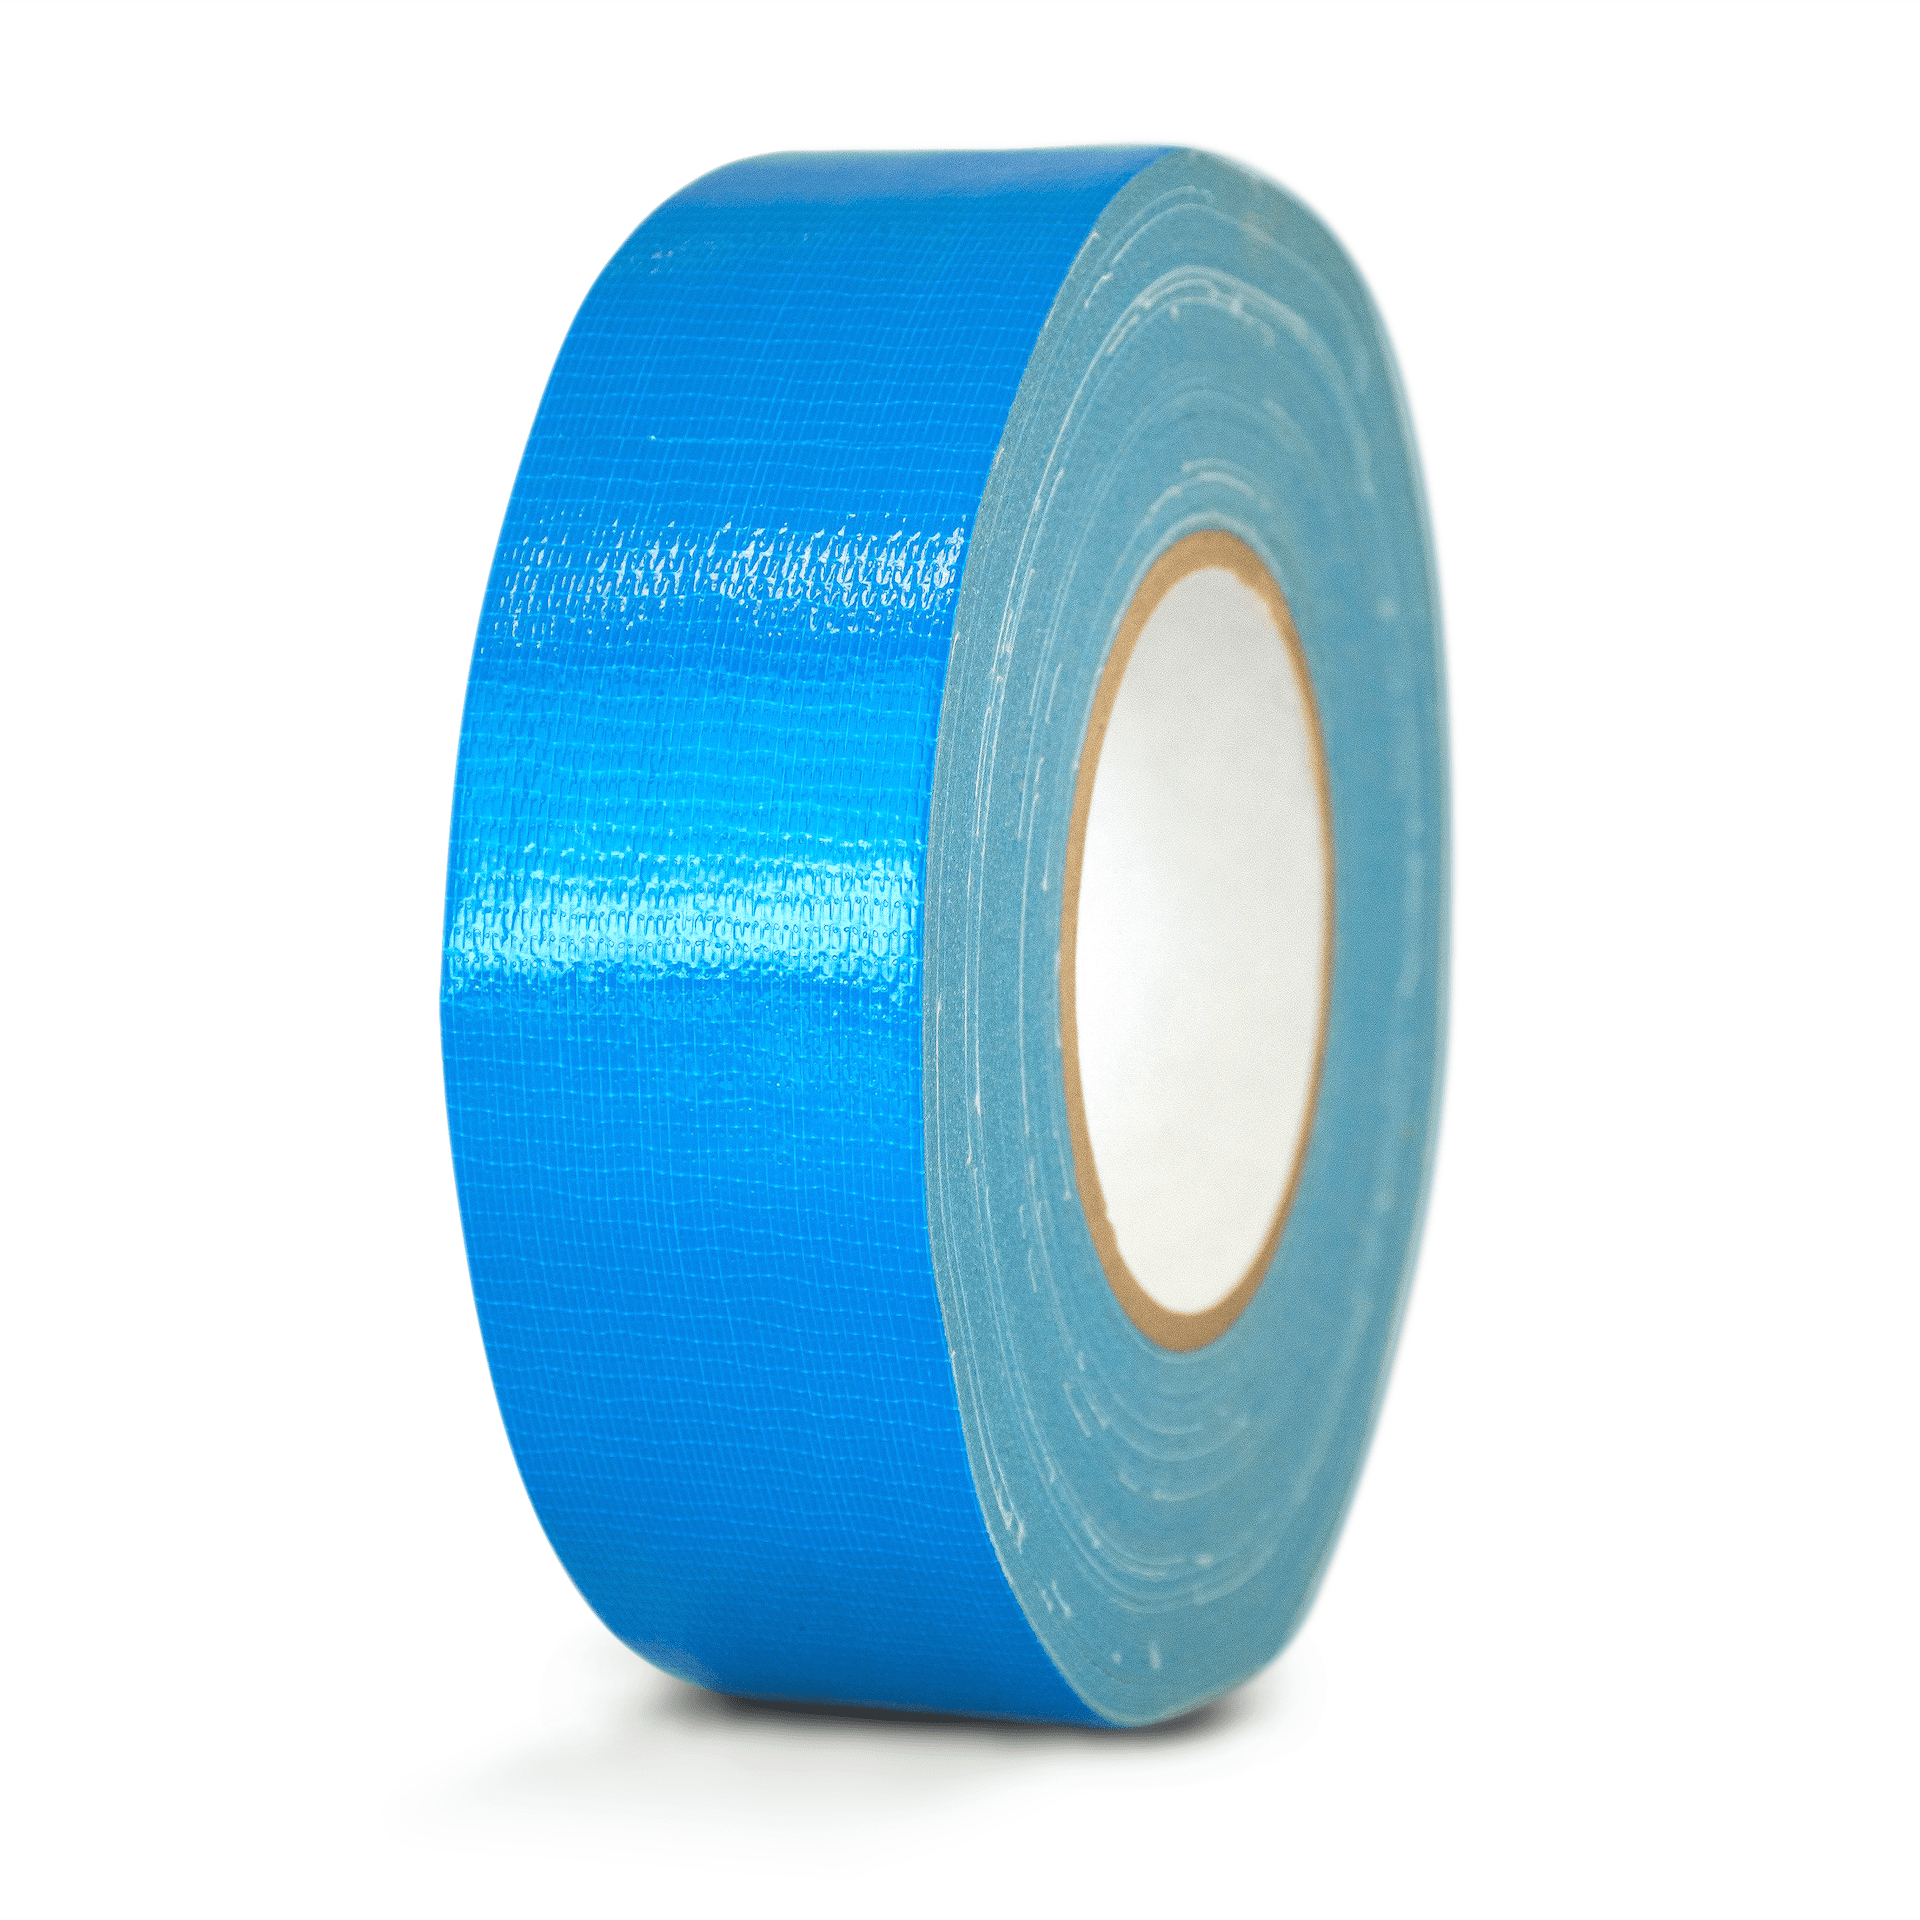 MAT Tape Purple 5.67 in. x 60 yd. Colored Duct Tape, 1 Roll 